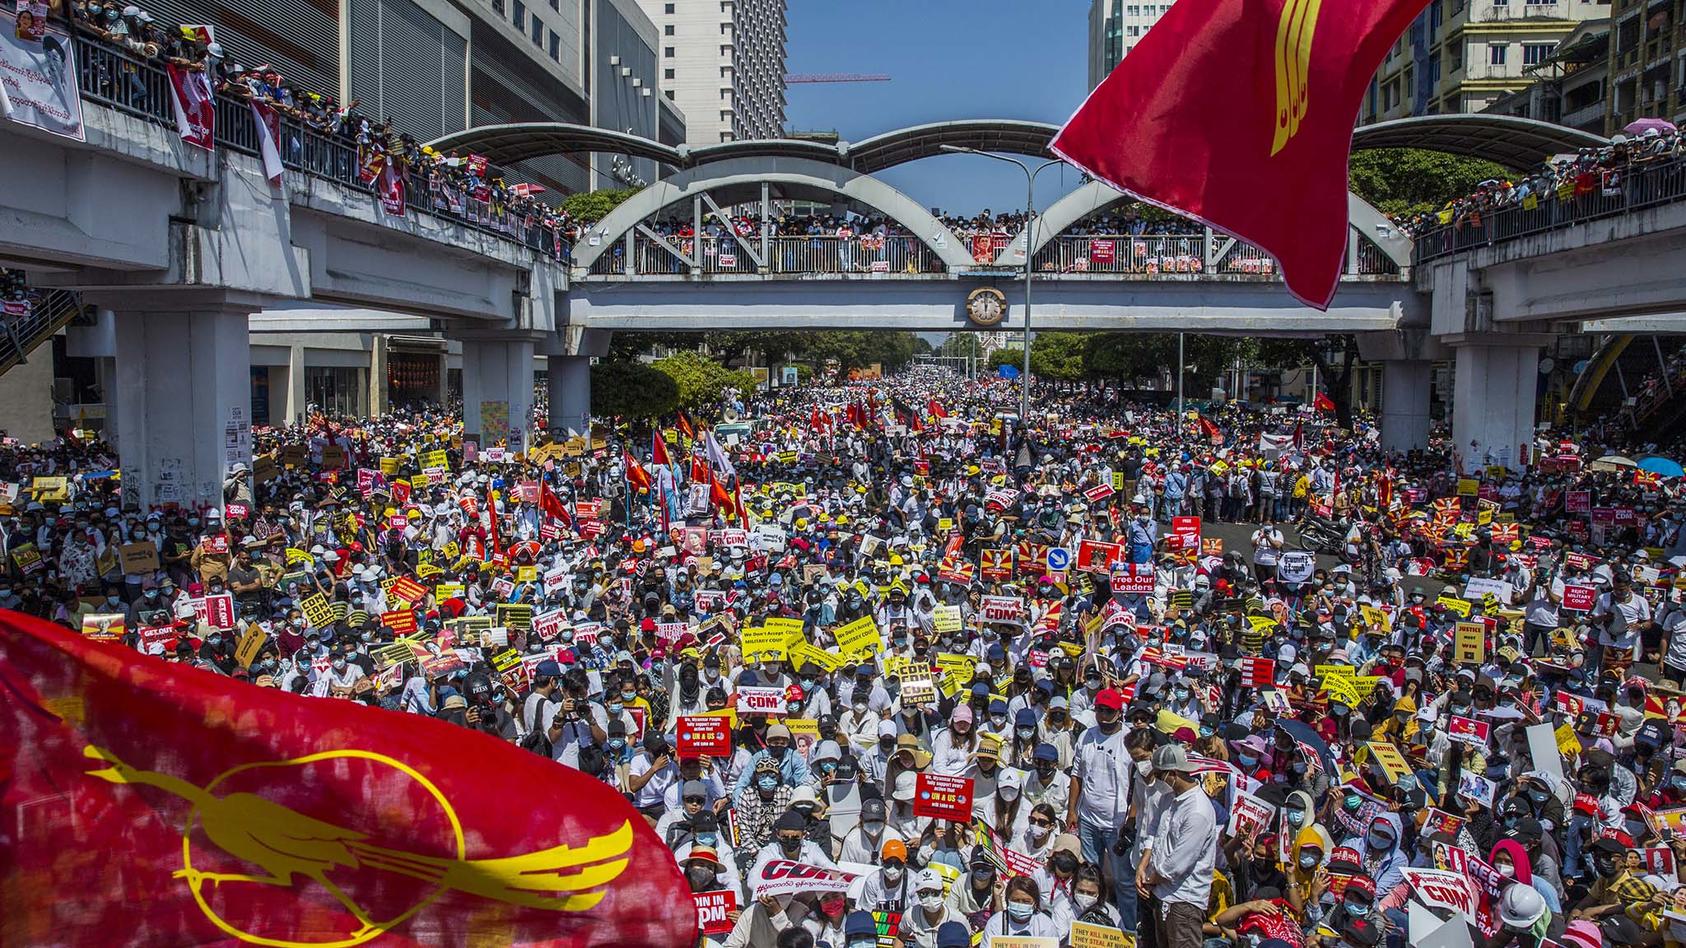 Hundreds of thousands of protesters gathered in Yangon, Myanmar on Wednesday, Feb. 17, 2021, demonstrating against the recent military coup. (The New York Times)